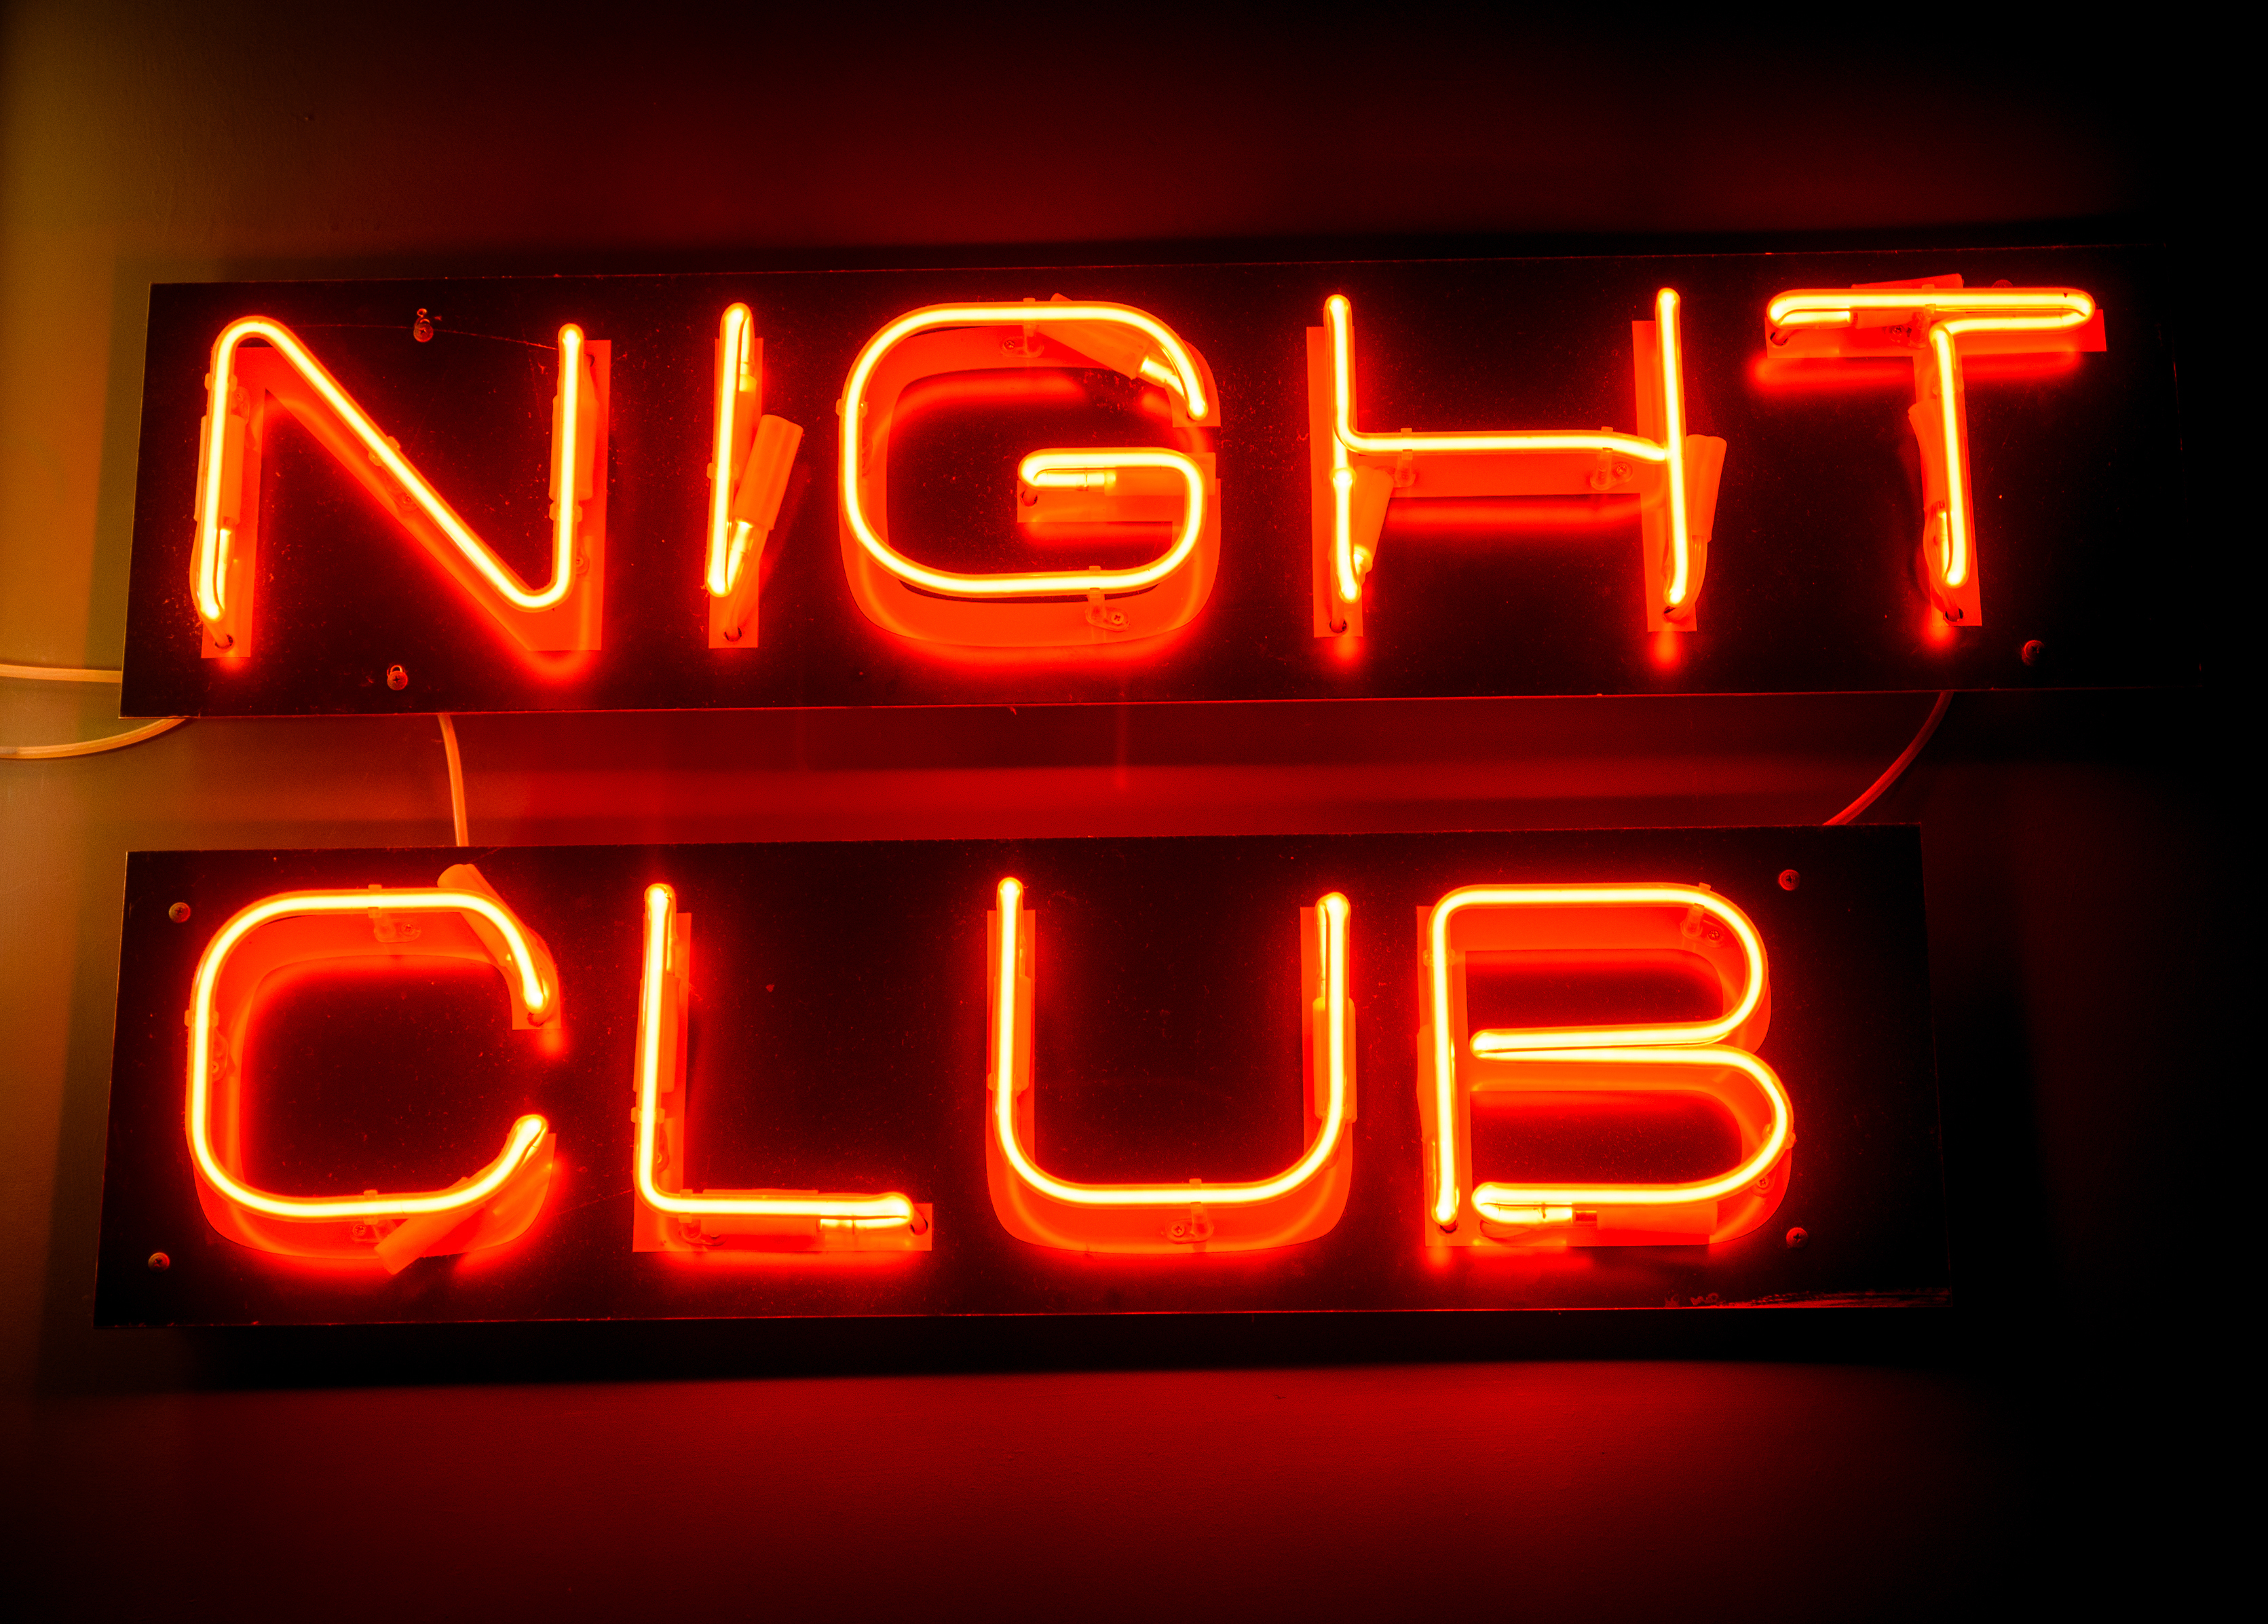 Nightclub neon sign hanging on the wall. | Source: Shutterstock